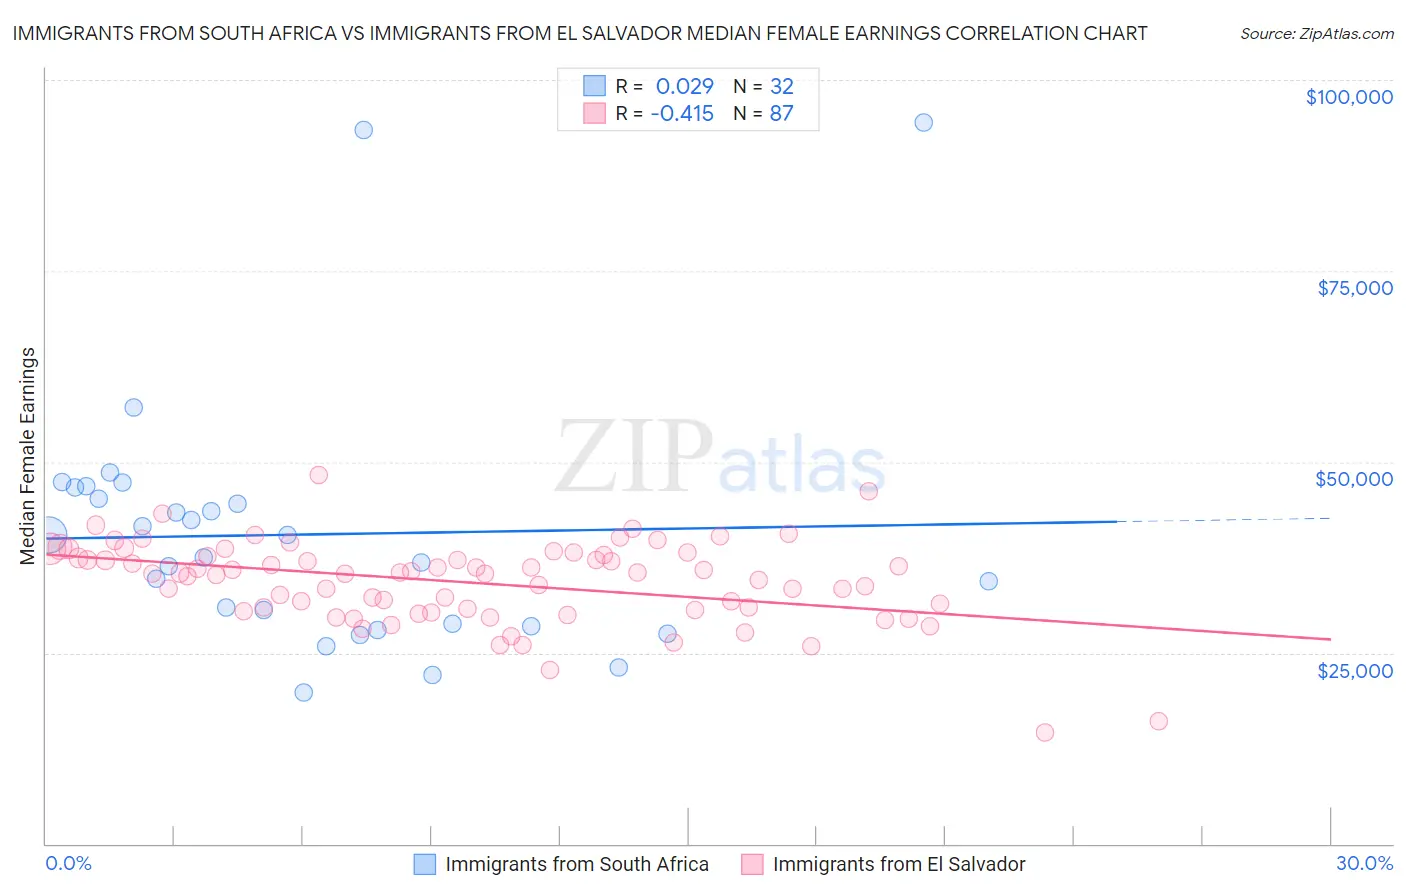 Immigrants from South Africa vs Immigrants from El Salvador Median Female Earnings